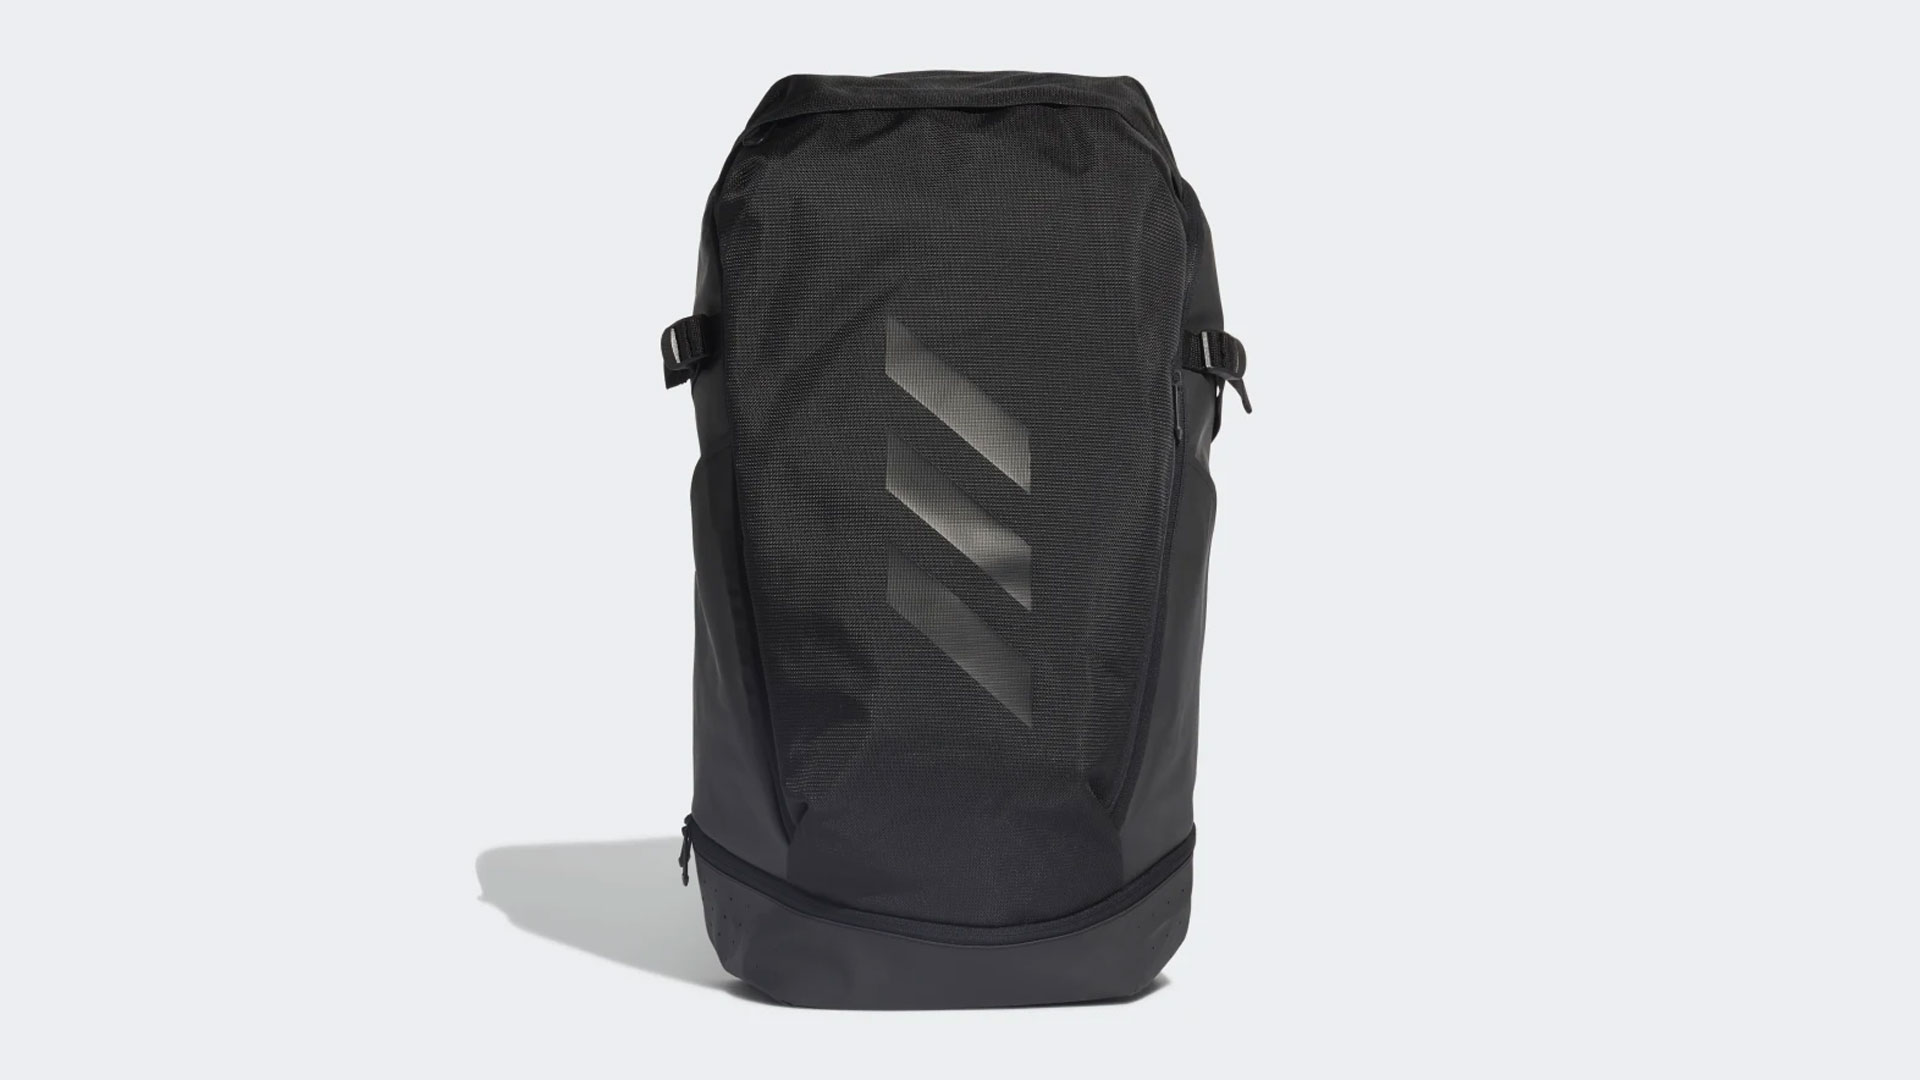 Best Adidas Backpacks: 5 Great Options to Consider 6